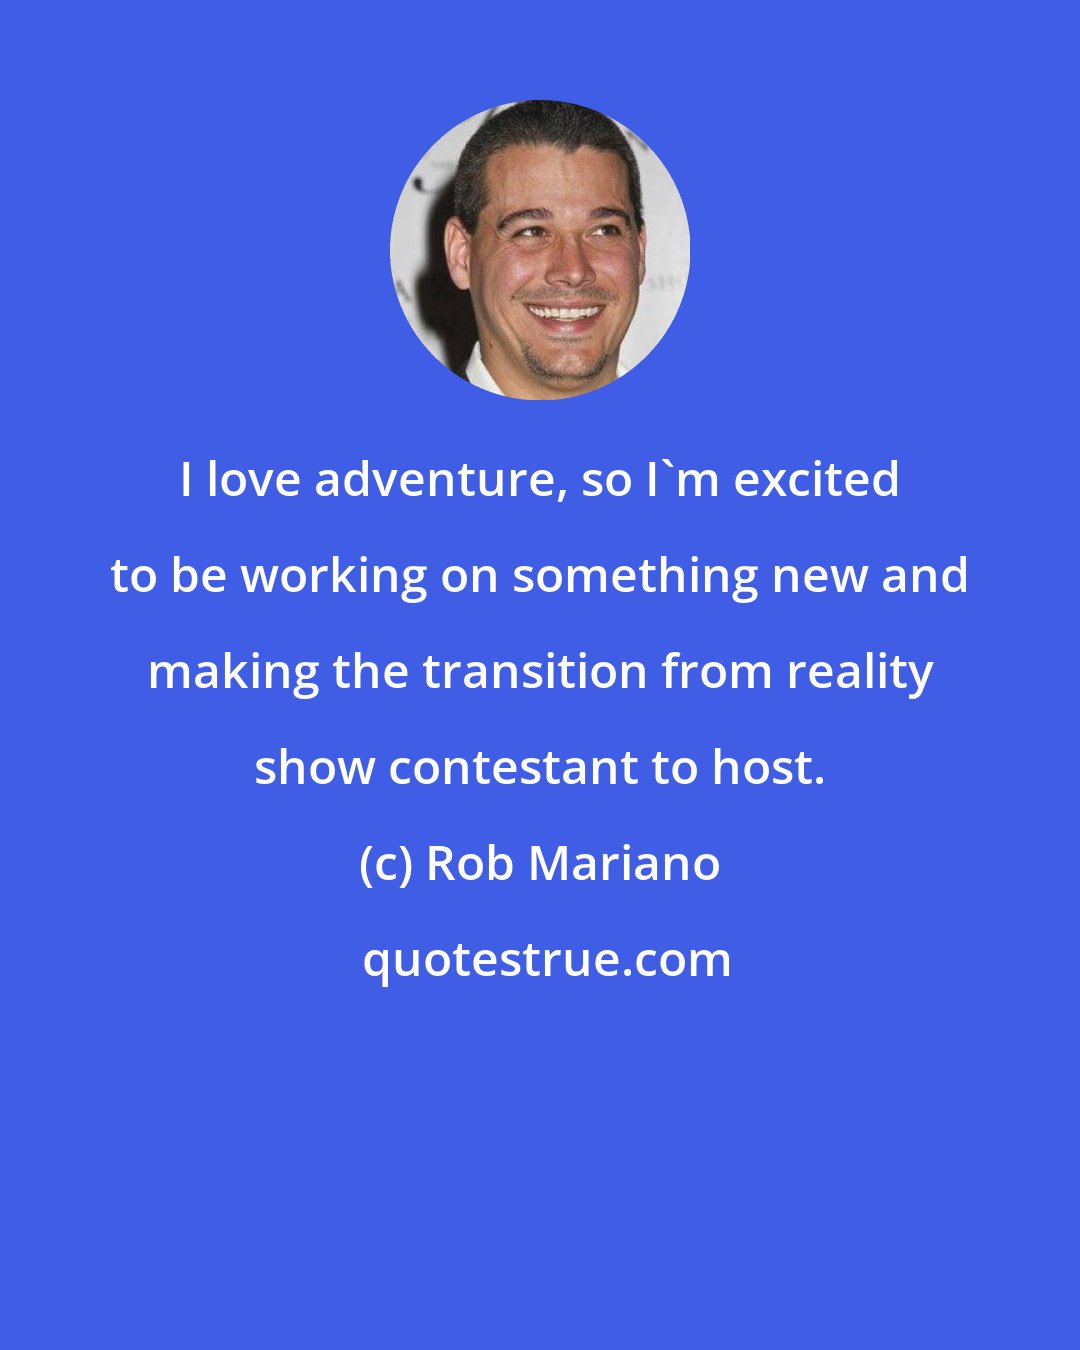 Rob Mariano: I love adventure, so I'm excited to be working on something new and making the transition from reality show contestant to host.